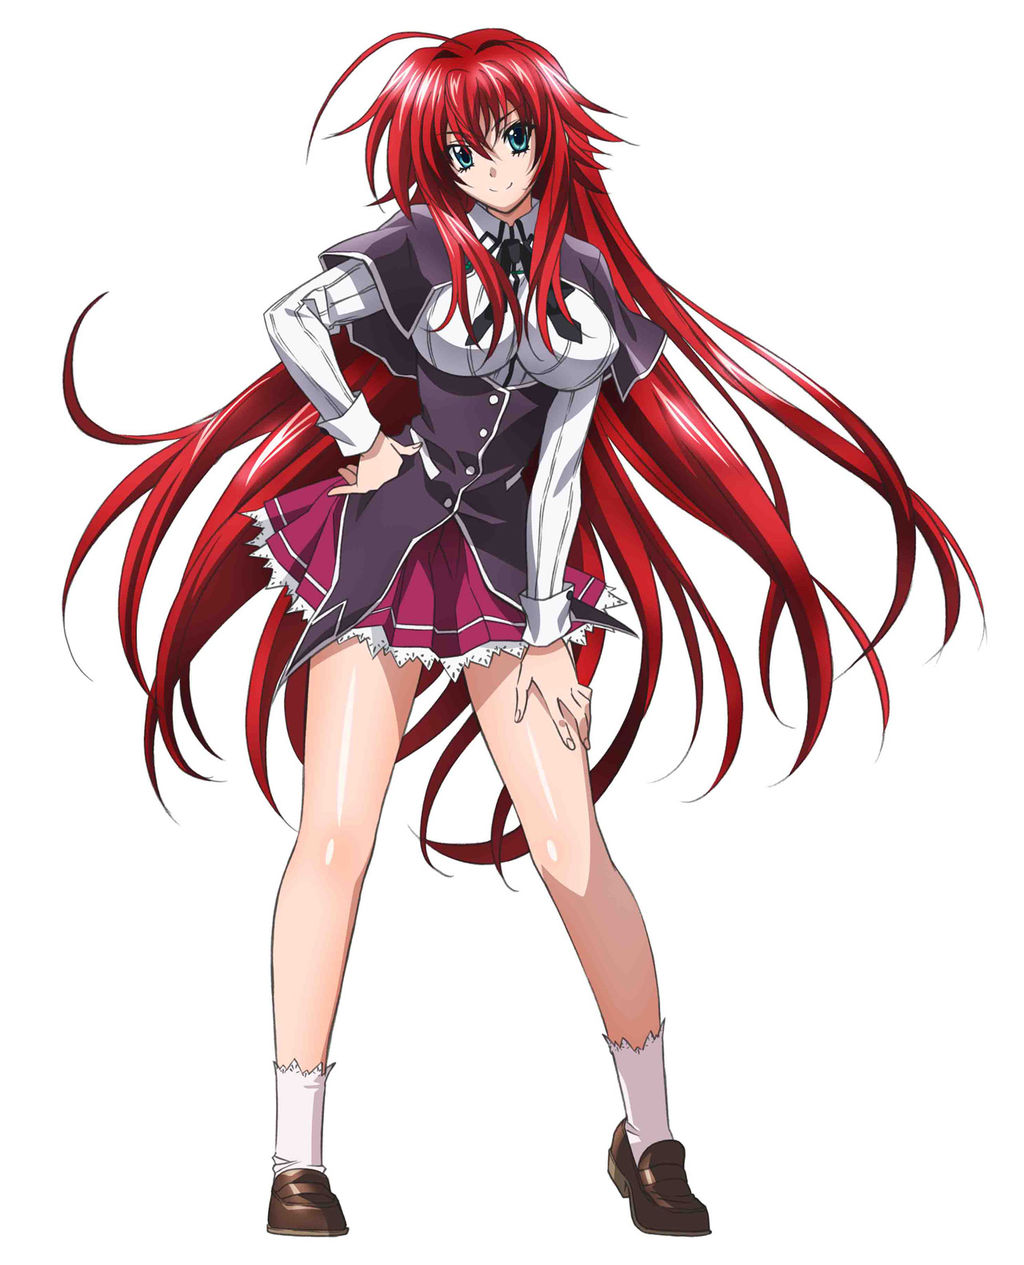 Category:Fanon Story, High School DxD Wiki